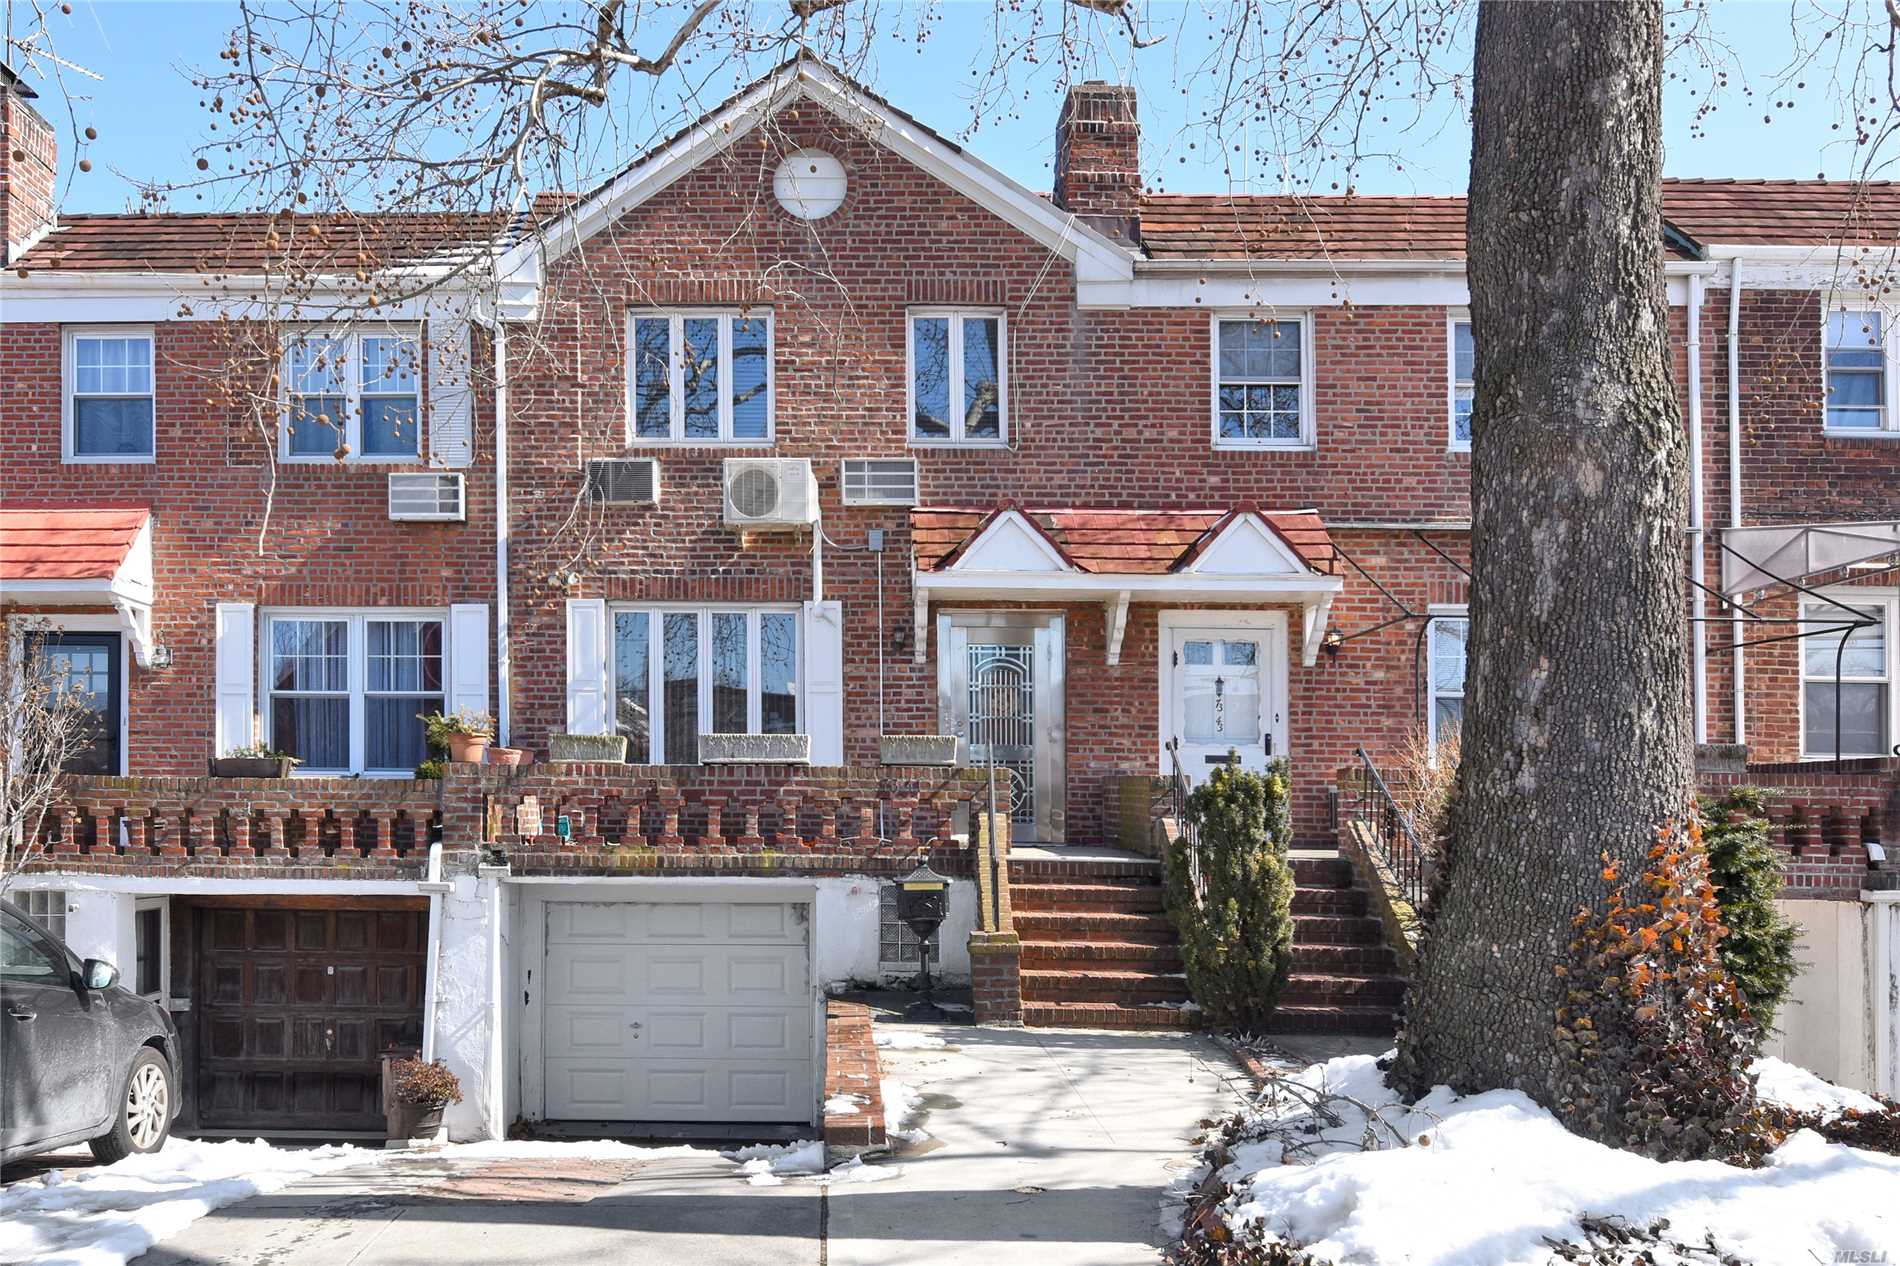 Beautiful Single Family House In the Heart of Fresh Meadows. Fully Renovated From Top To Bottom. 4 Bedrooms, 3 Full Baths. Fully Finished Basement With Separate Entrance. Private Driveway With Garage. Backyard. Closed To All Transportation And Shopping.